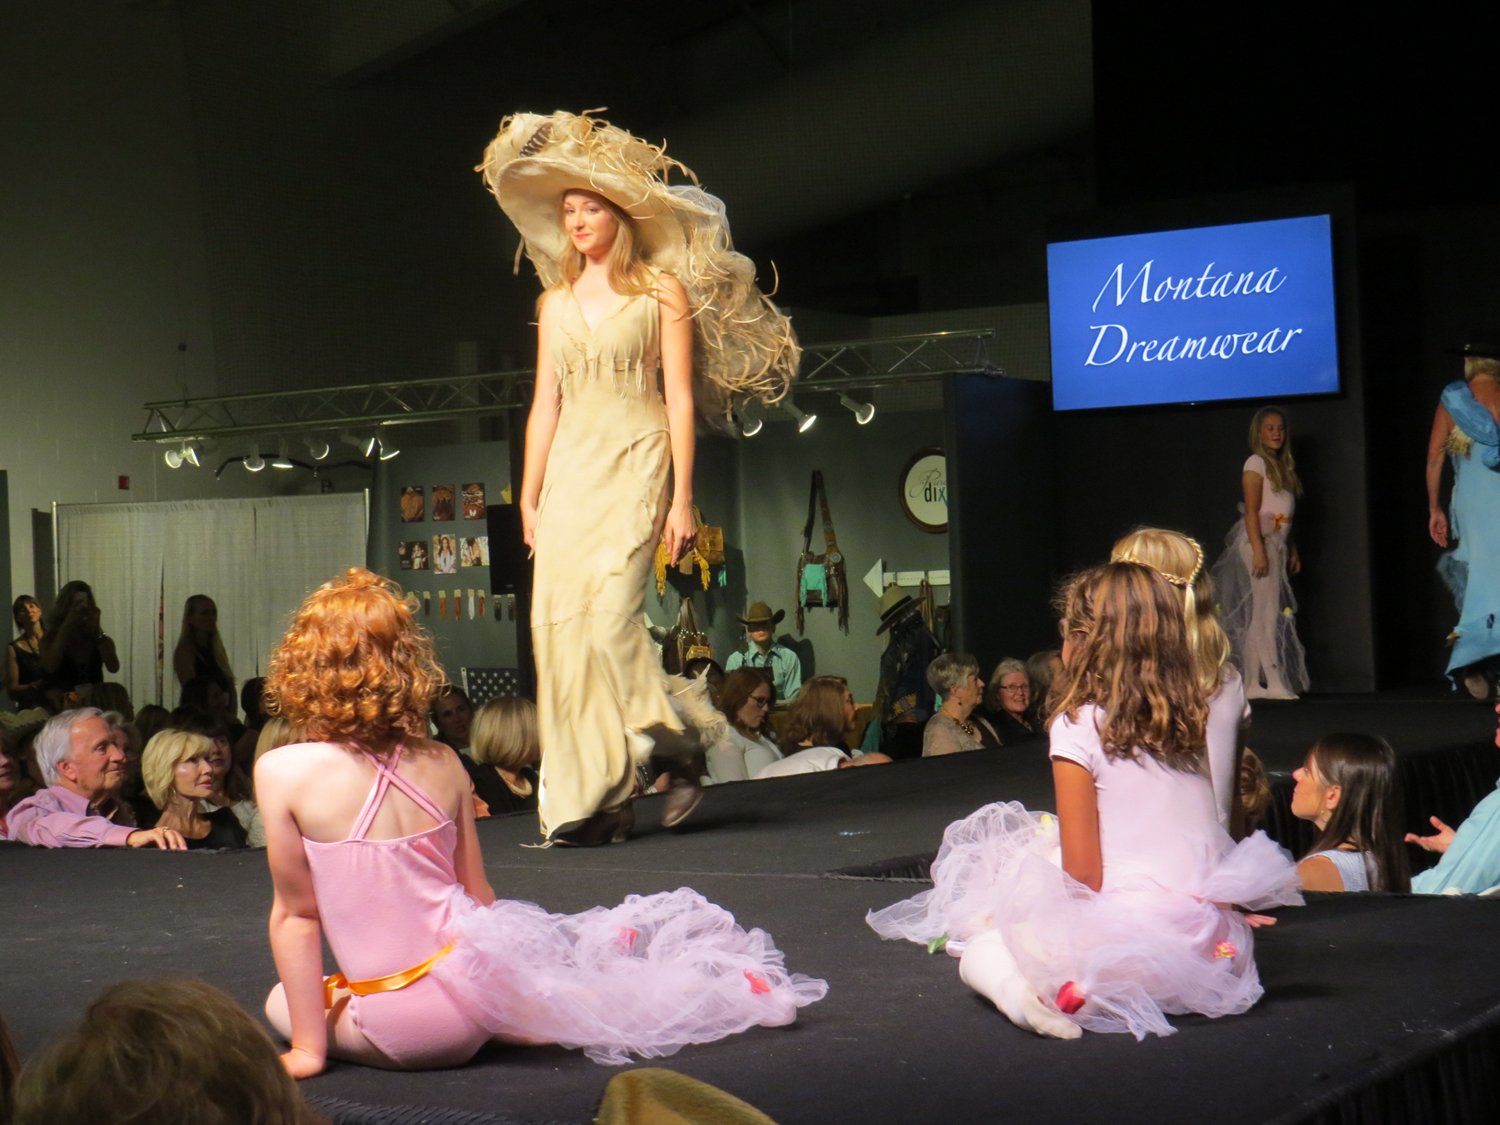 A live runway fashion show is the exciting finale at the Opening Preview Party each year at the Western Design Exhibit & Sale, a signature event of the Fall Arts Festival in Jackson Hole, Wyoming.